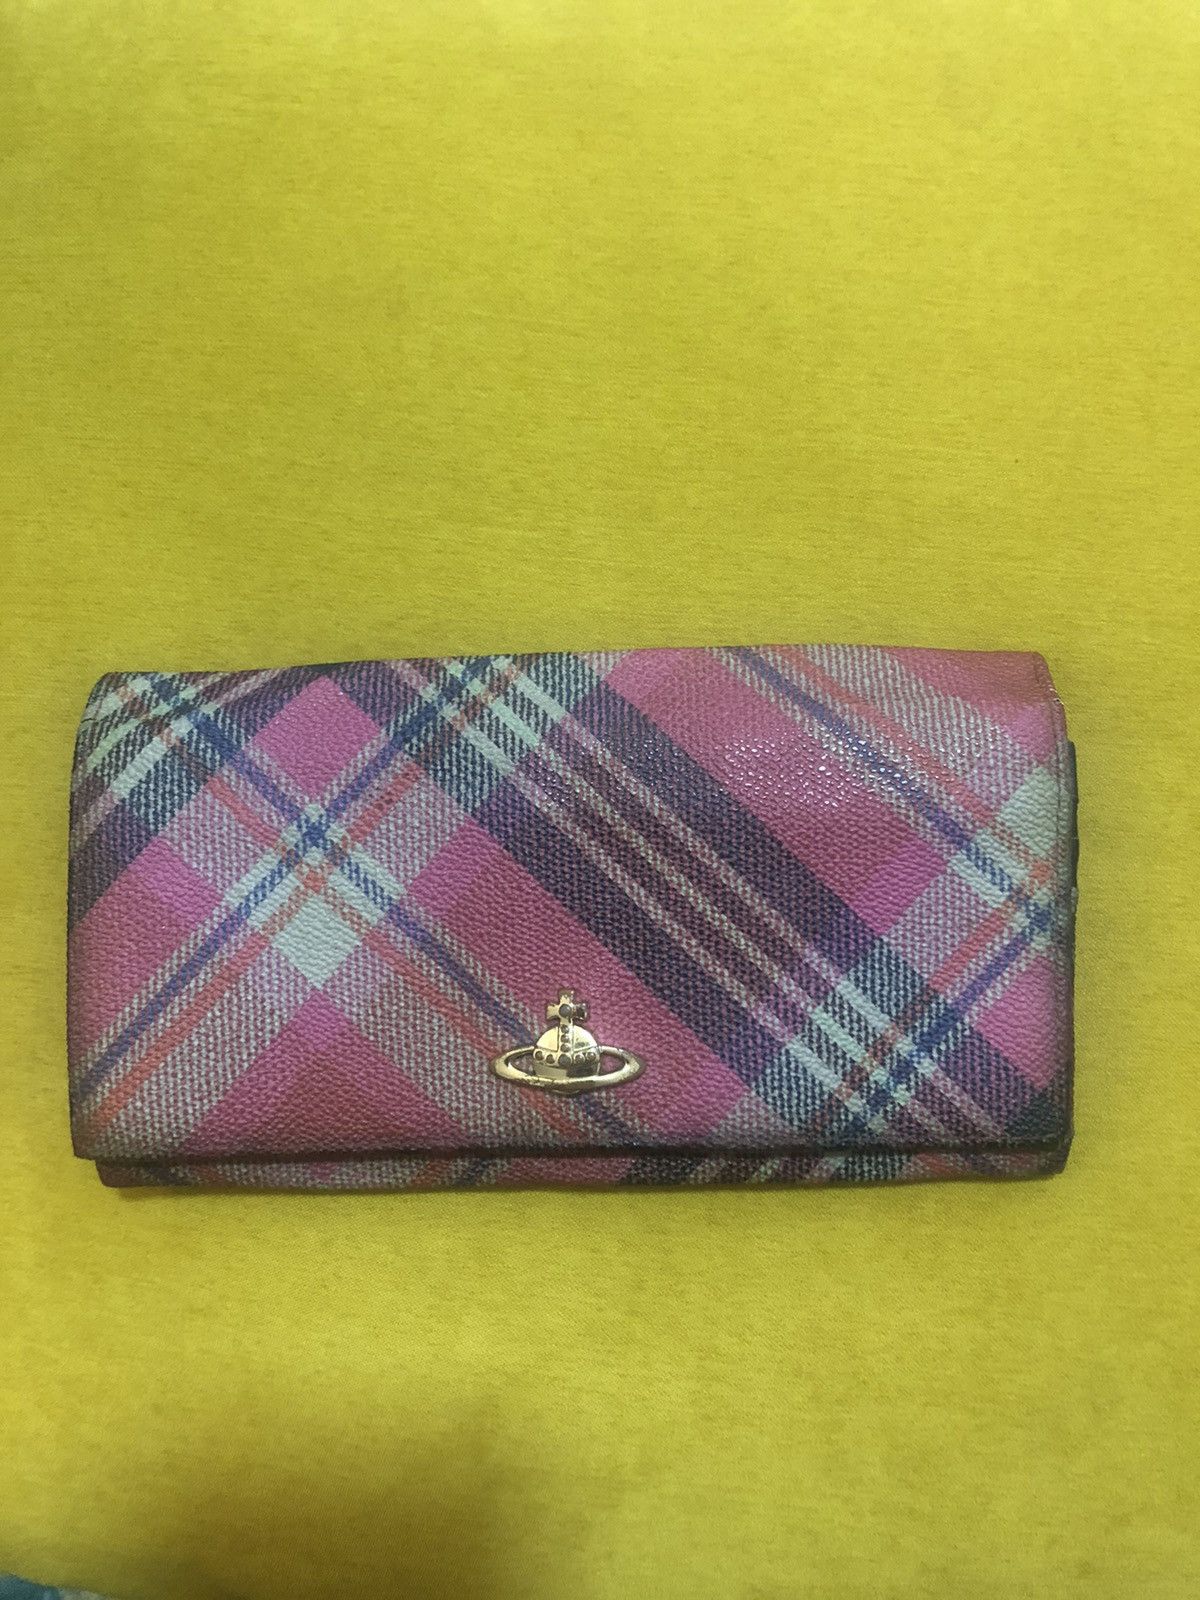 Vivienne Westwood London Wallet Made Italy - 1